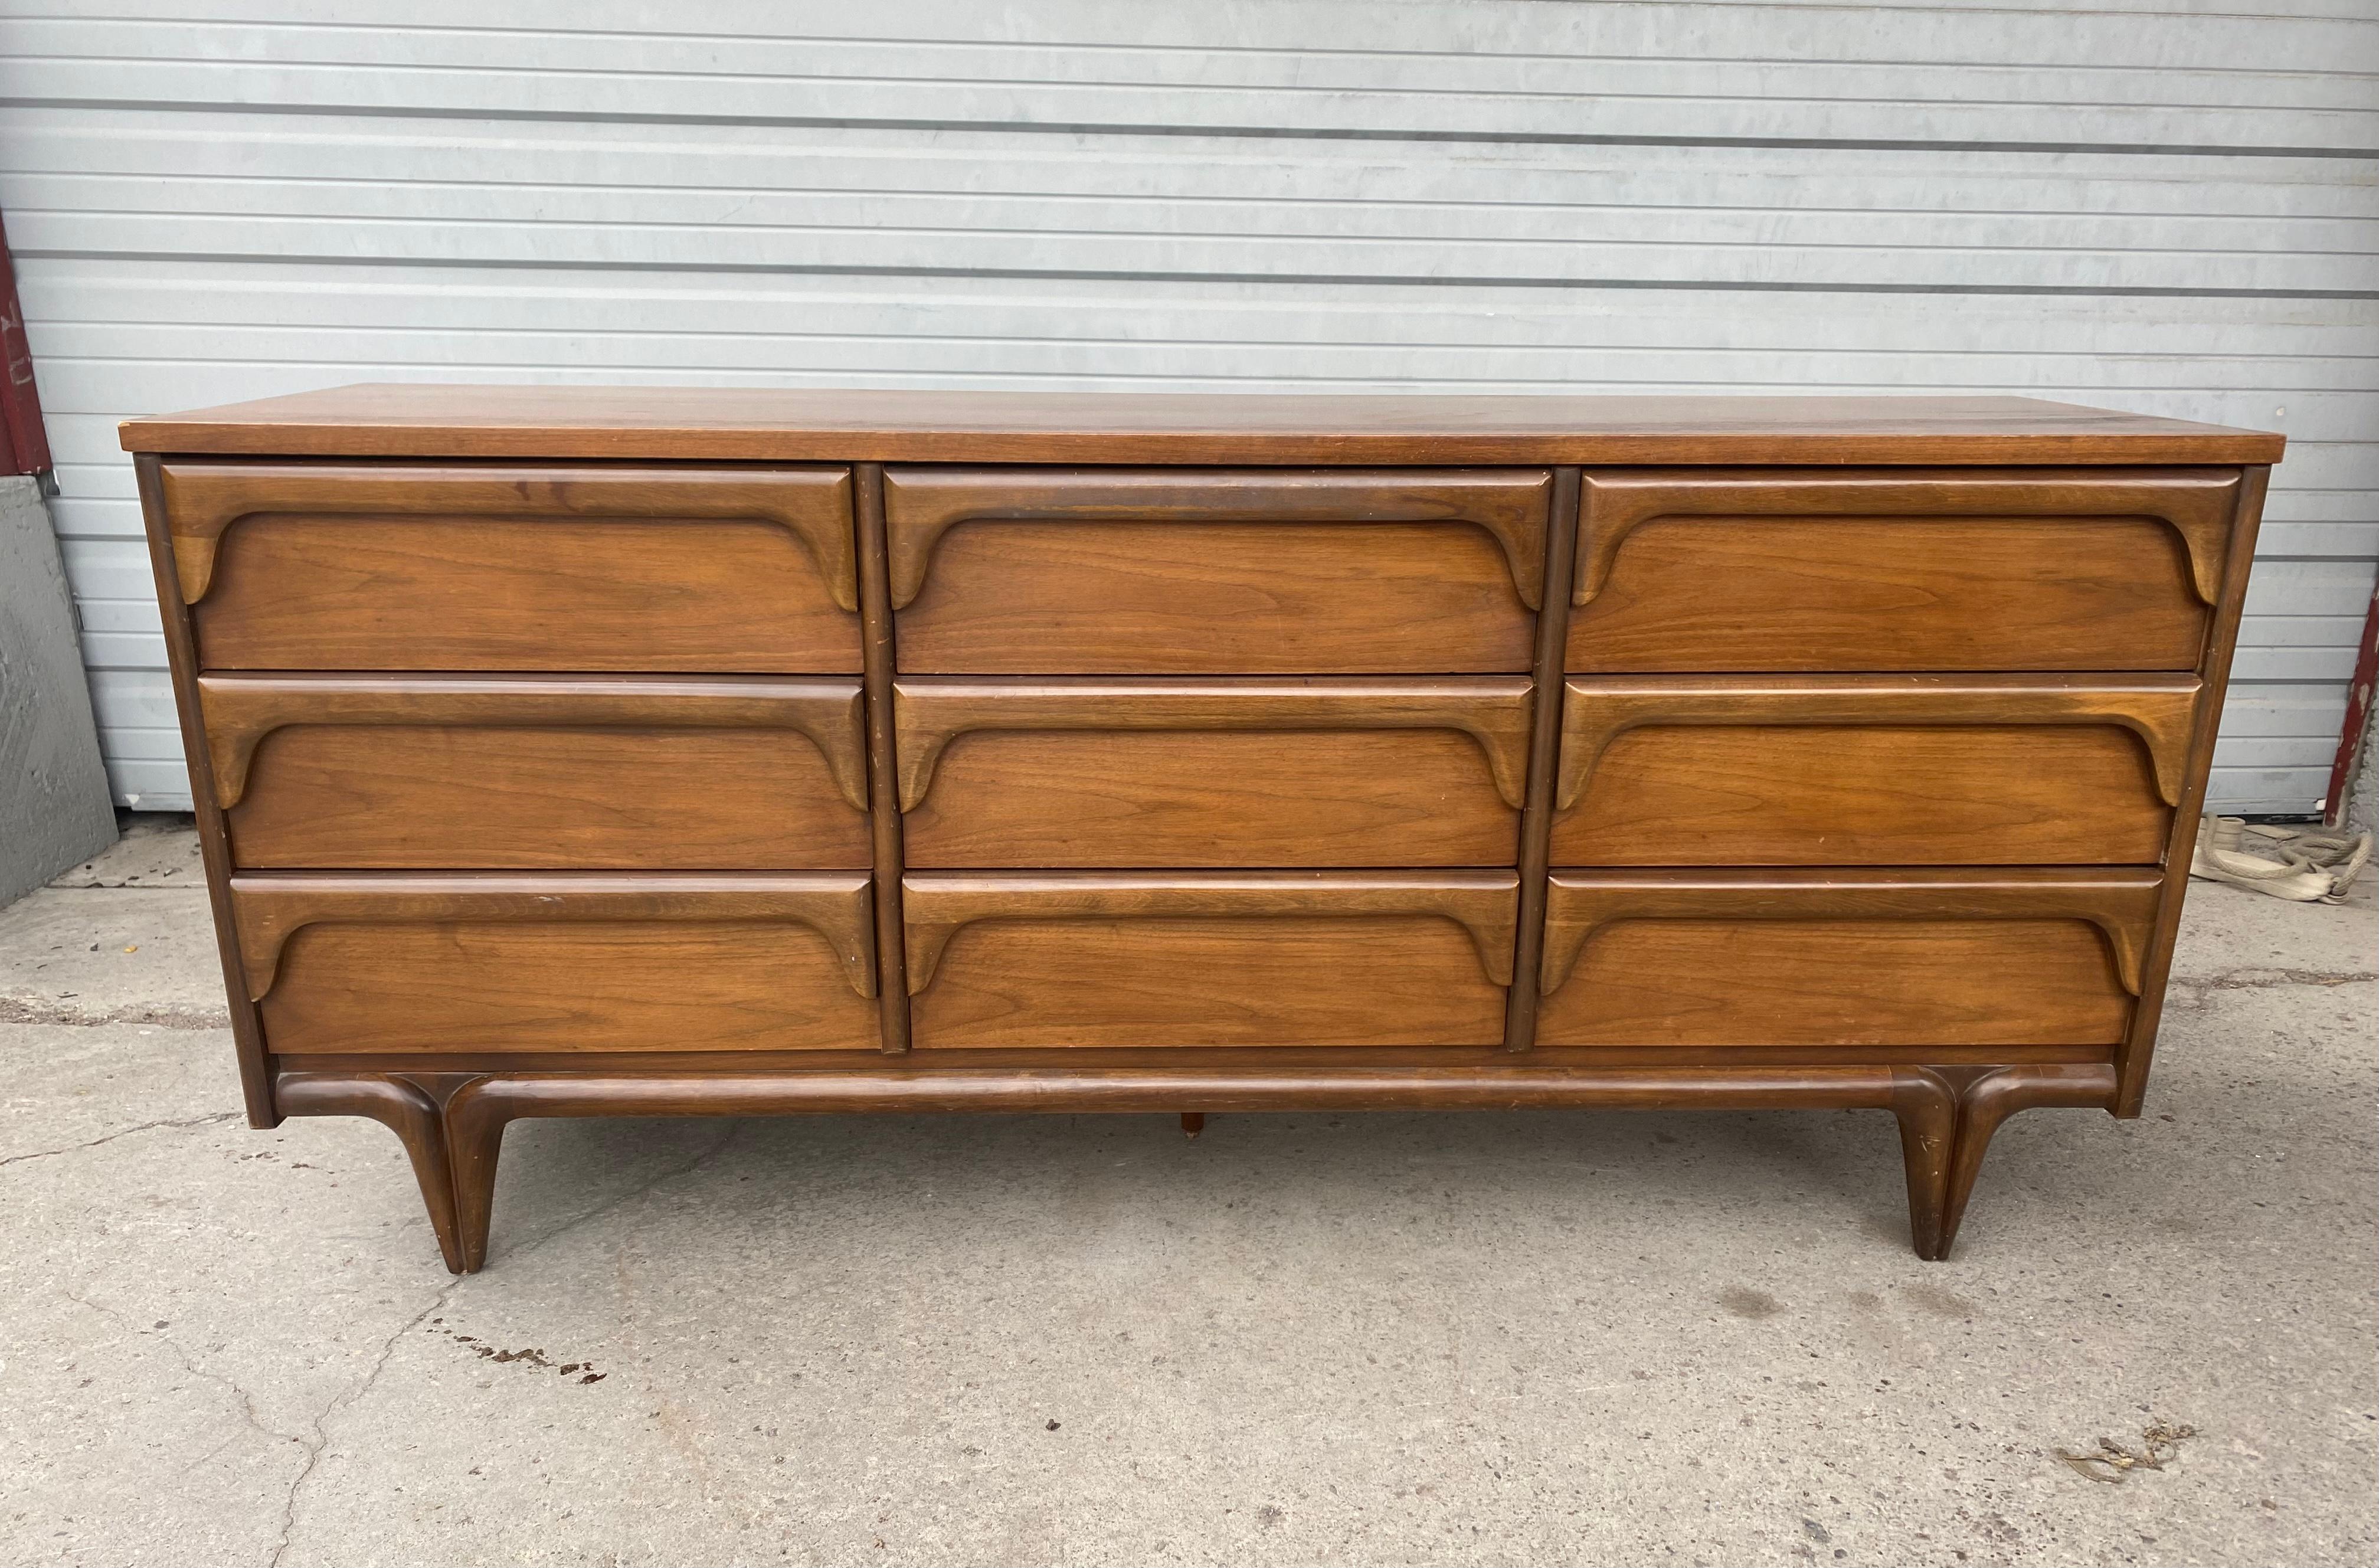 Classic Mid-Century Modern 9-drawer dresser, sculptural walnut by Bassett Furniture company. Wonderful design, Elegant yet whimsical, Superior quality and construction, dove-tail drawers. Generous storage, Smooth function, hand delivery avail to New